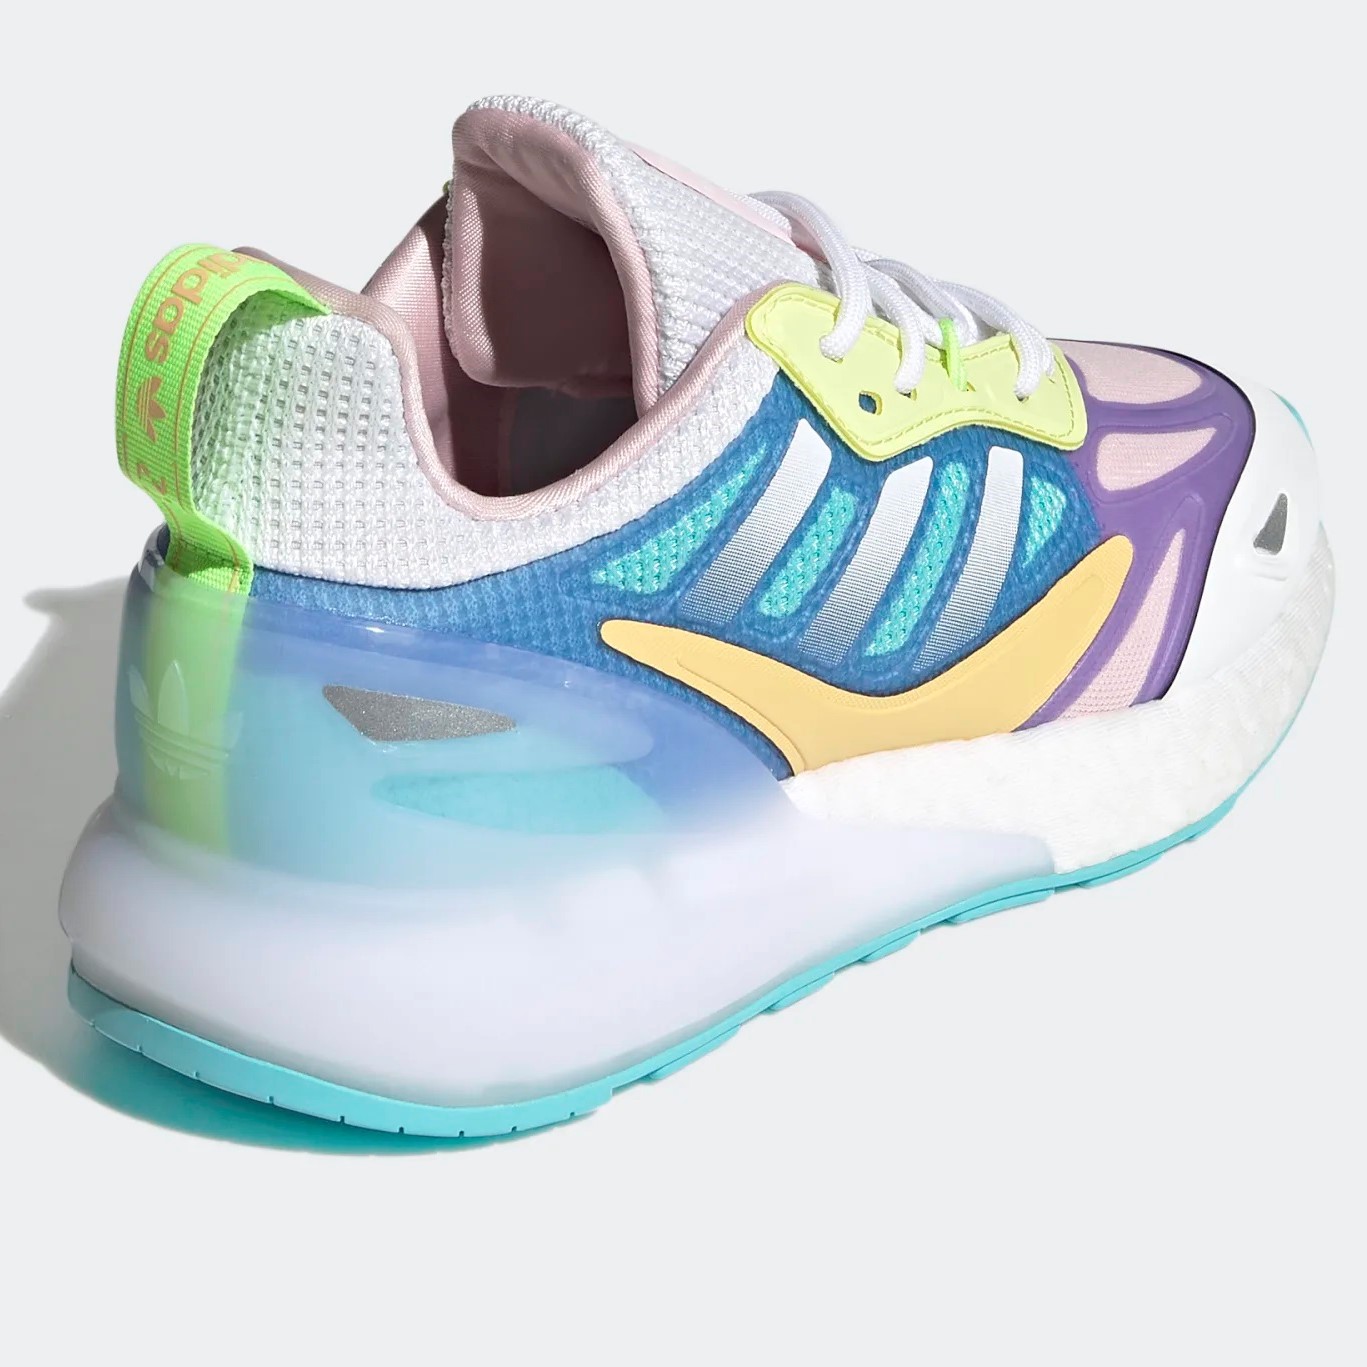 GIÀY THỂ THAO ADIDAS ZX 2K BOOST 2.0 3